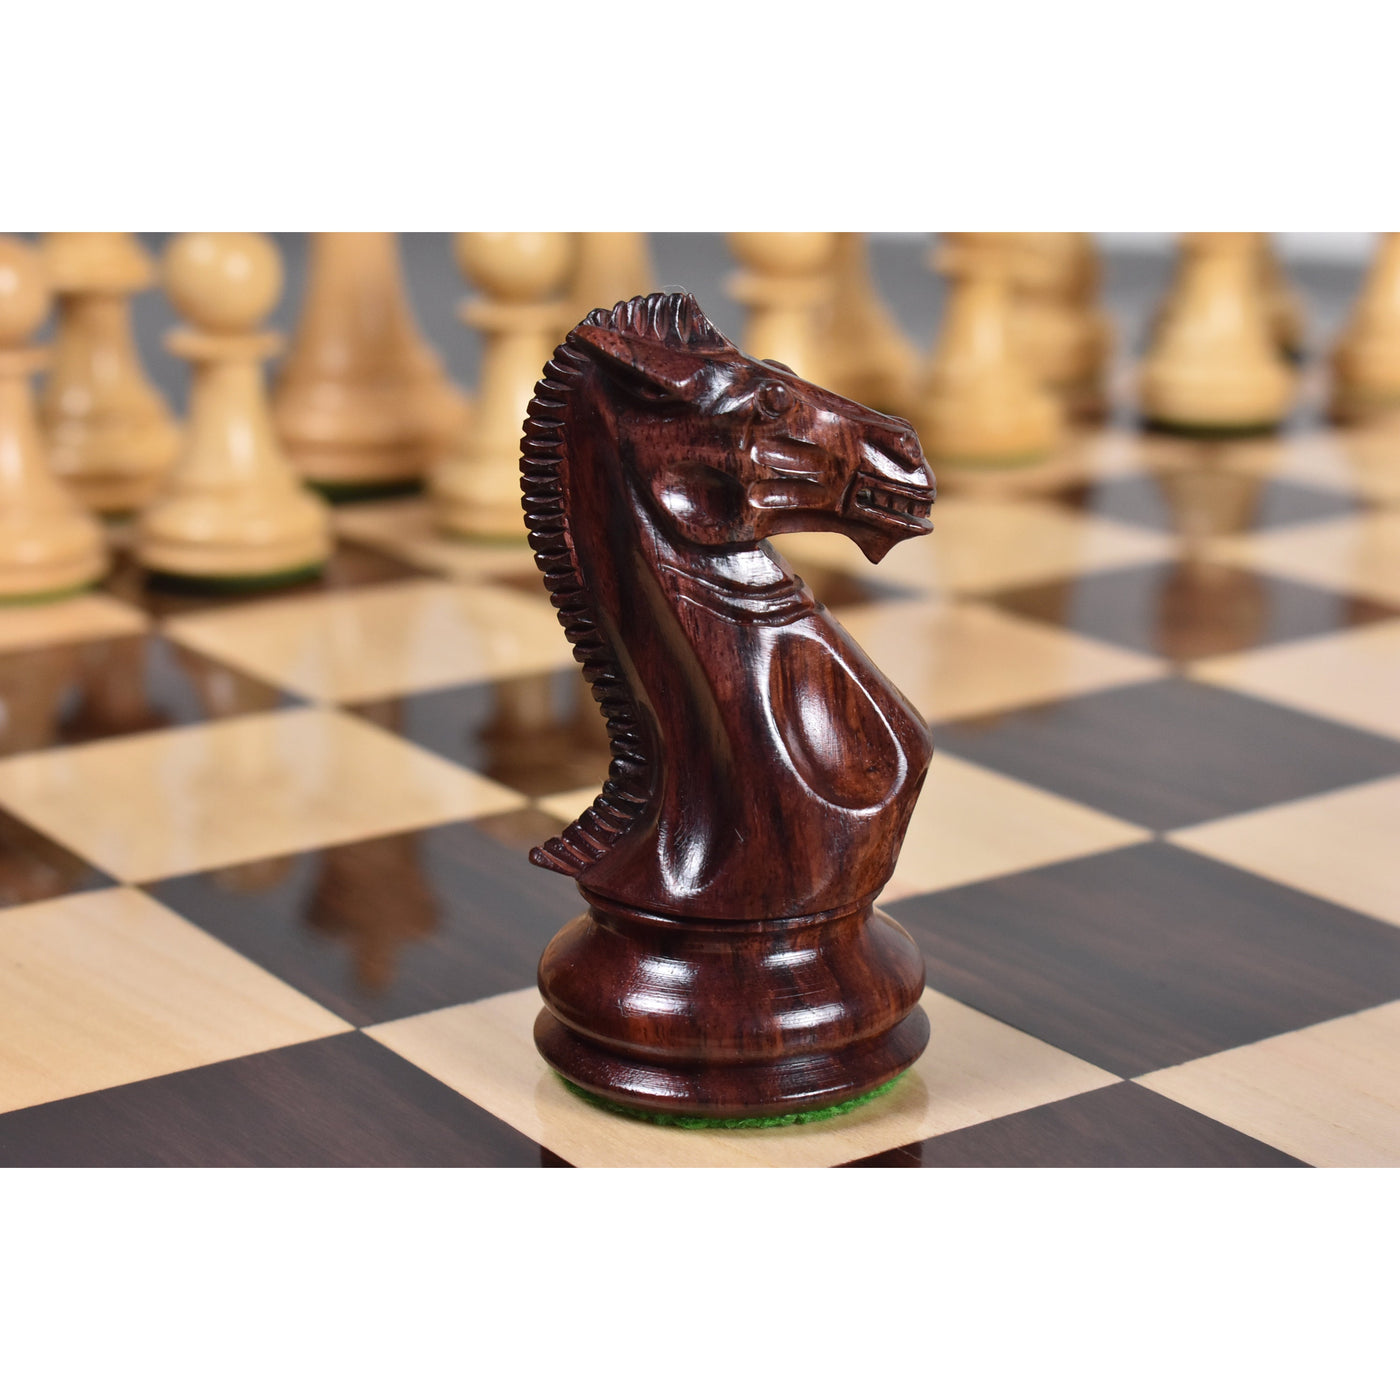 Slightly Imperfect 4.1″ Traveller Staunton Luxury Chess Set - Chess Pieces Only – Triple Weighted Rosewood